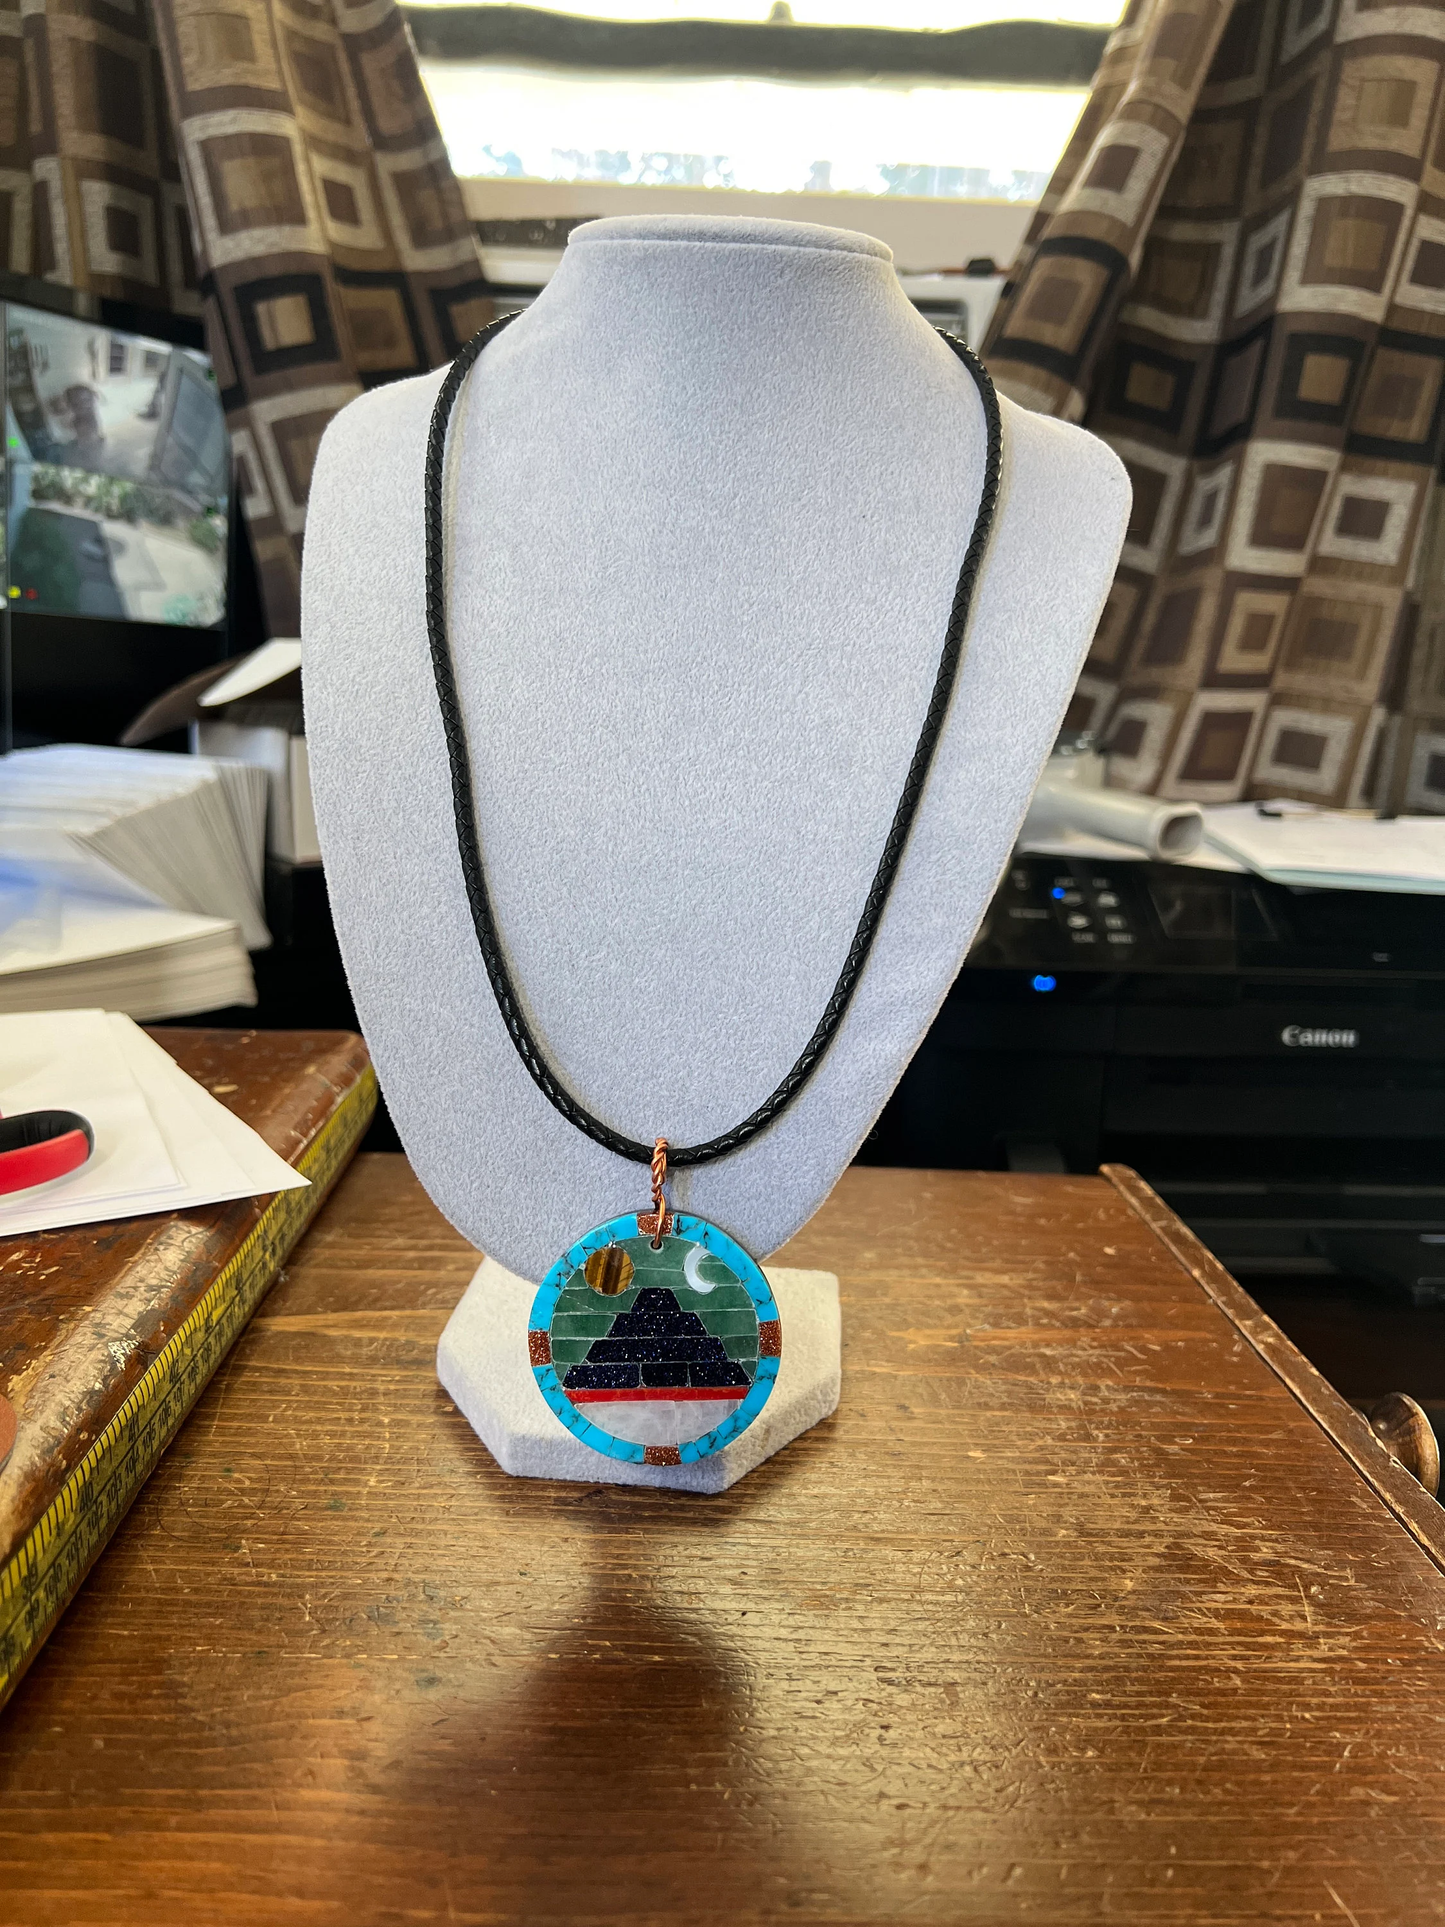 Teotihuacan Pyramid Pendant Necklace, Obsidian Tiger Eye Turquoise, Handmade in Mexico (#15)